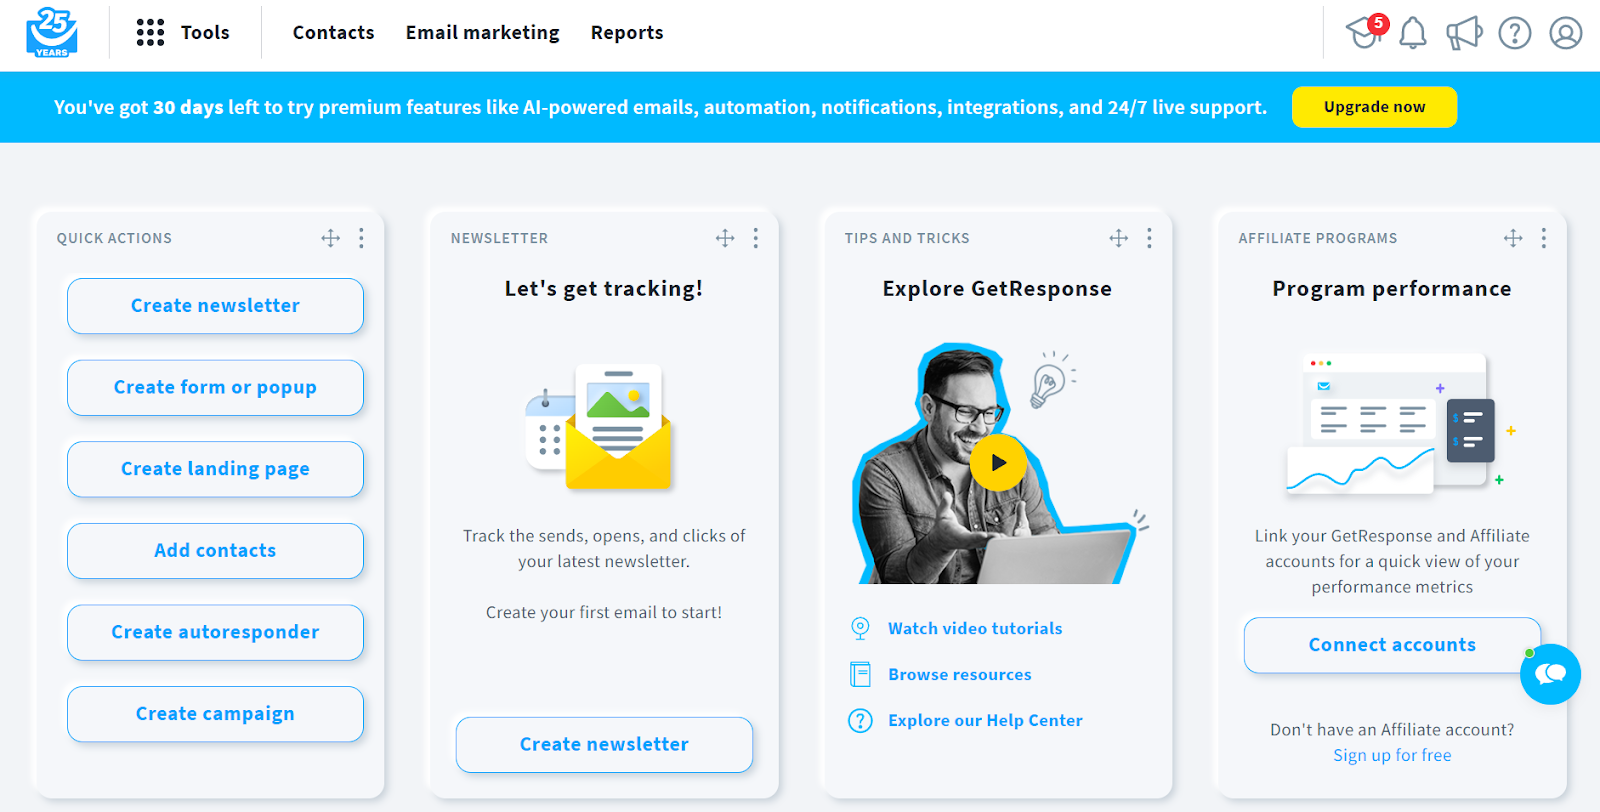 GetResponse’s dashboard contains easy-to-use templates for various forms of email marketing.